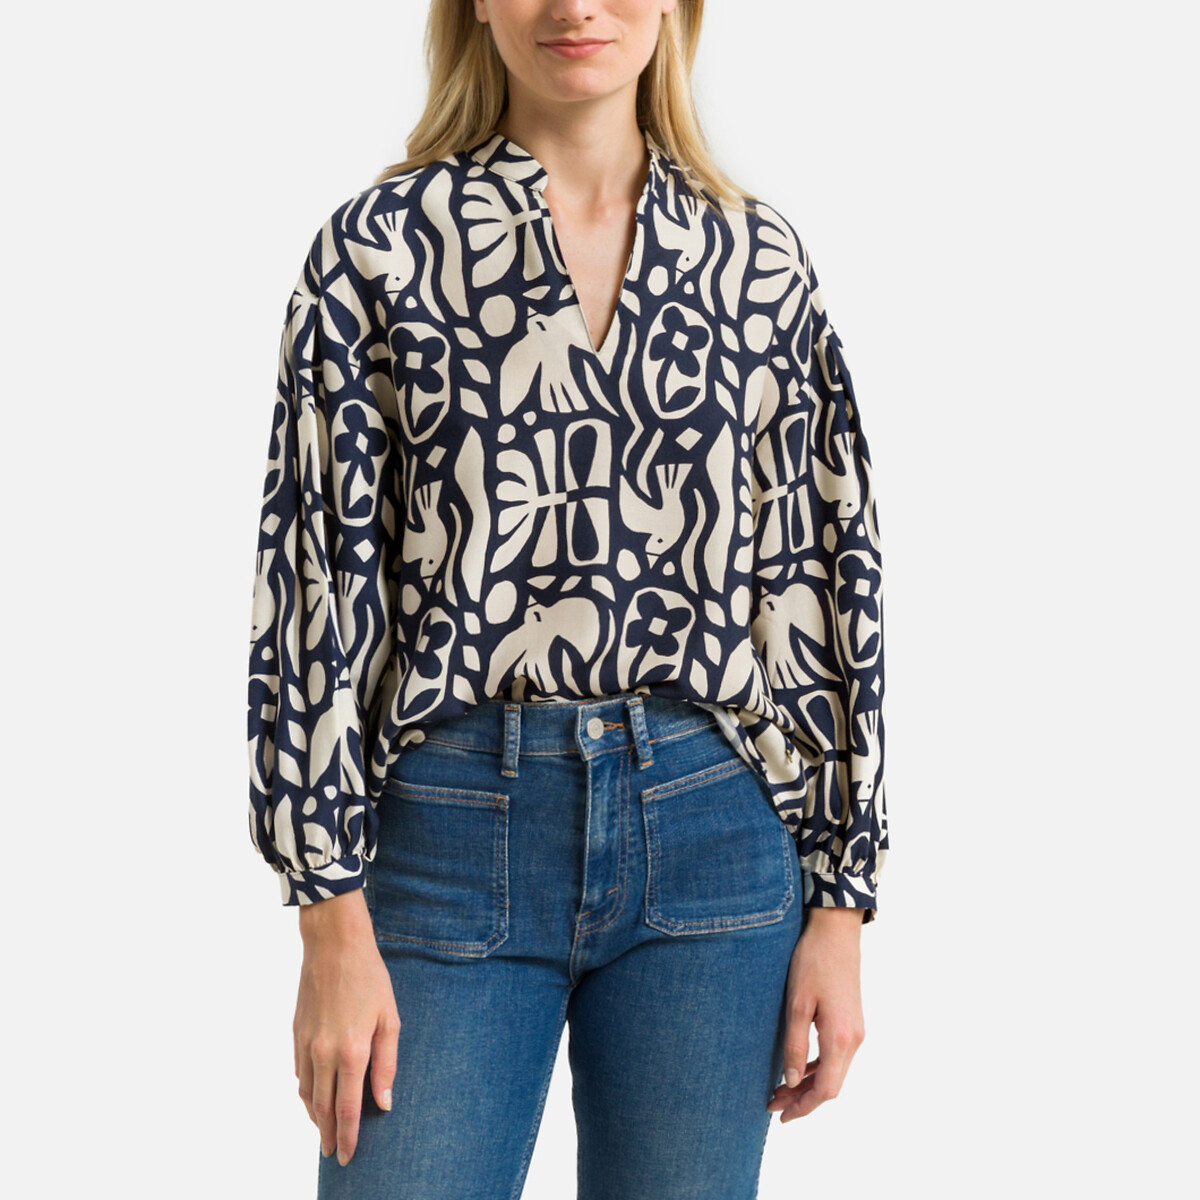 Toiny Graphic Print Blouse with Long Sleeves